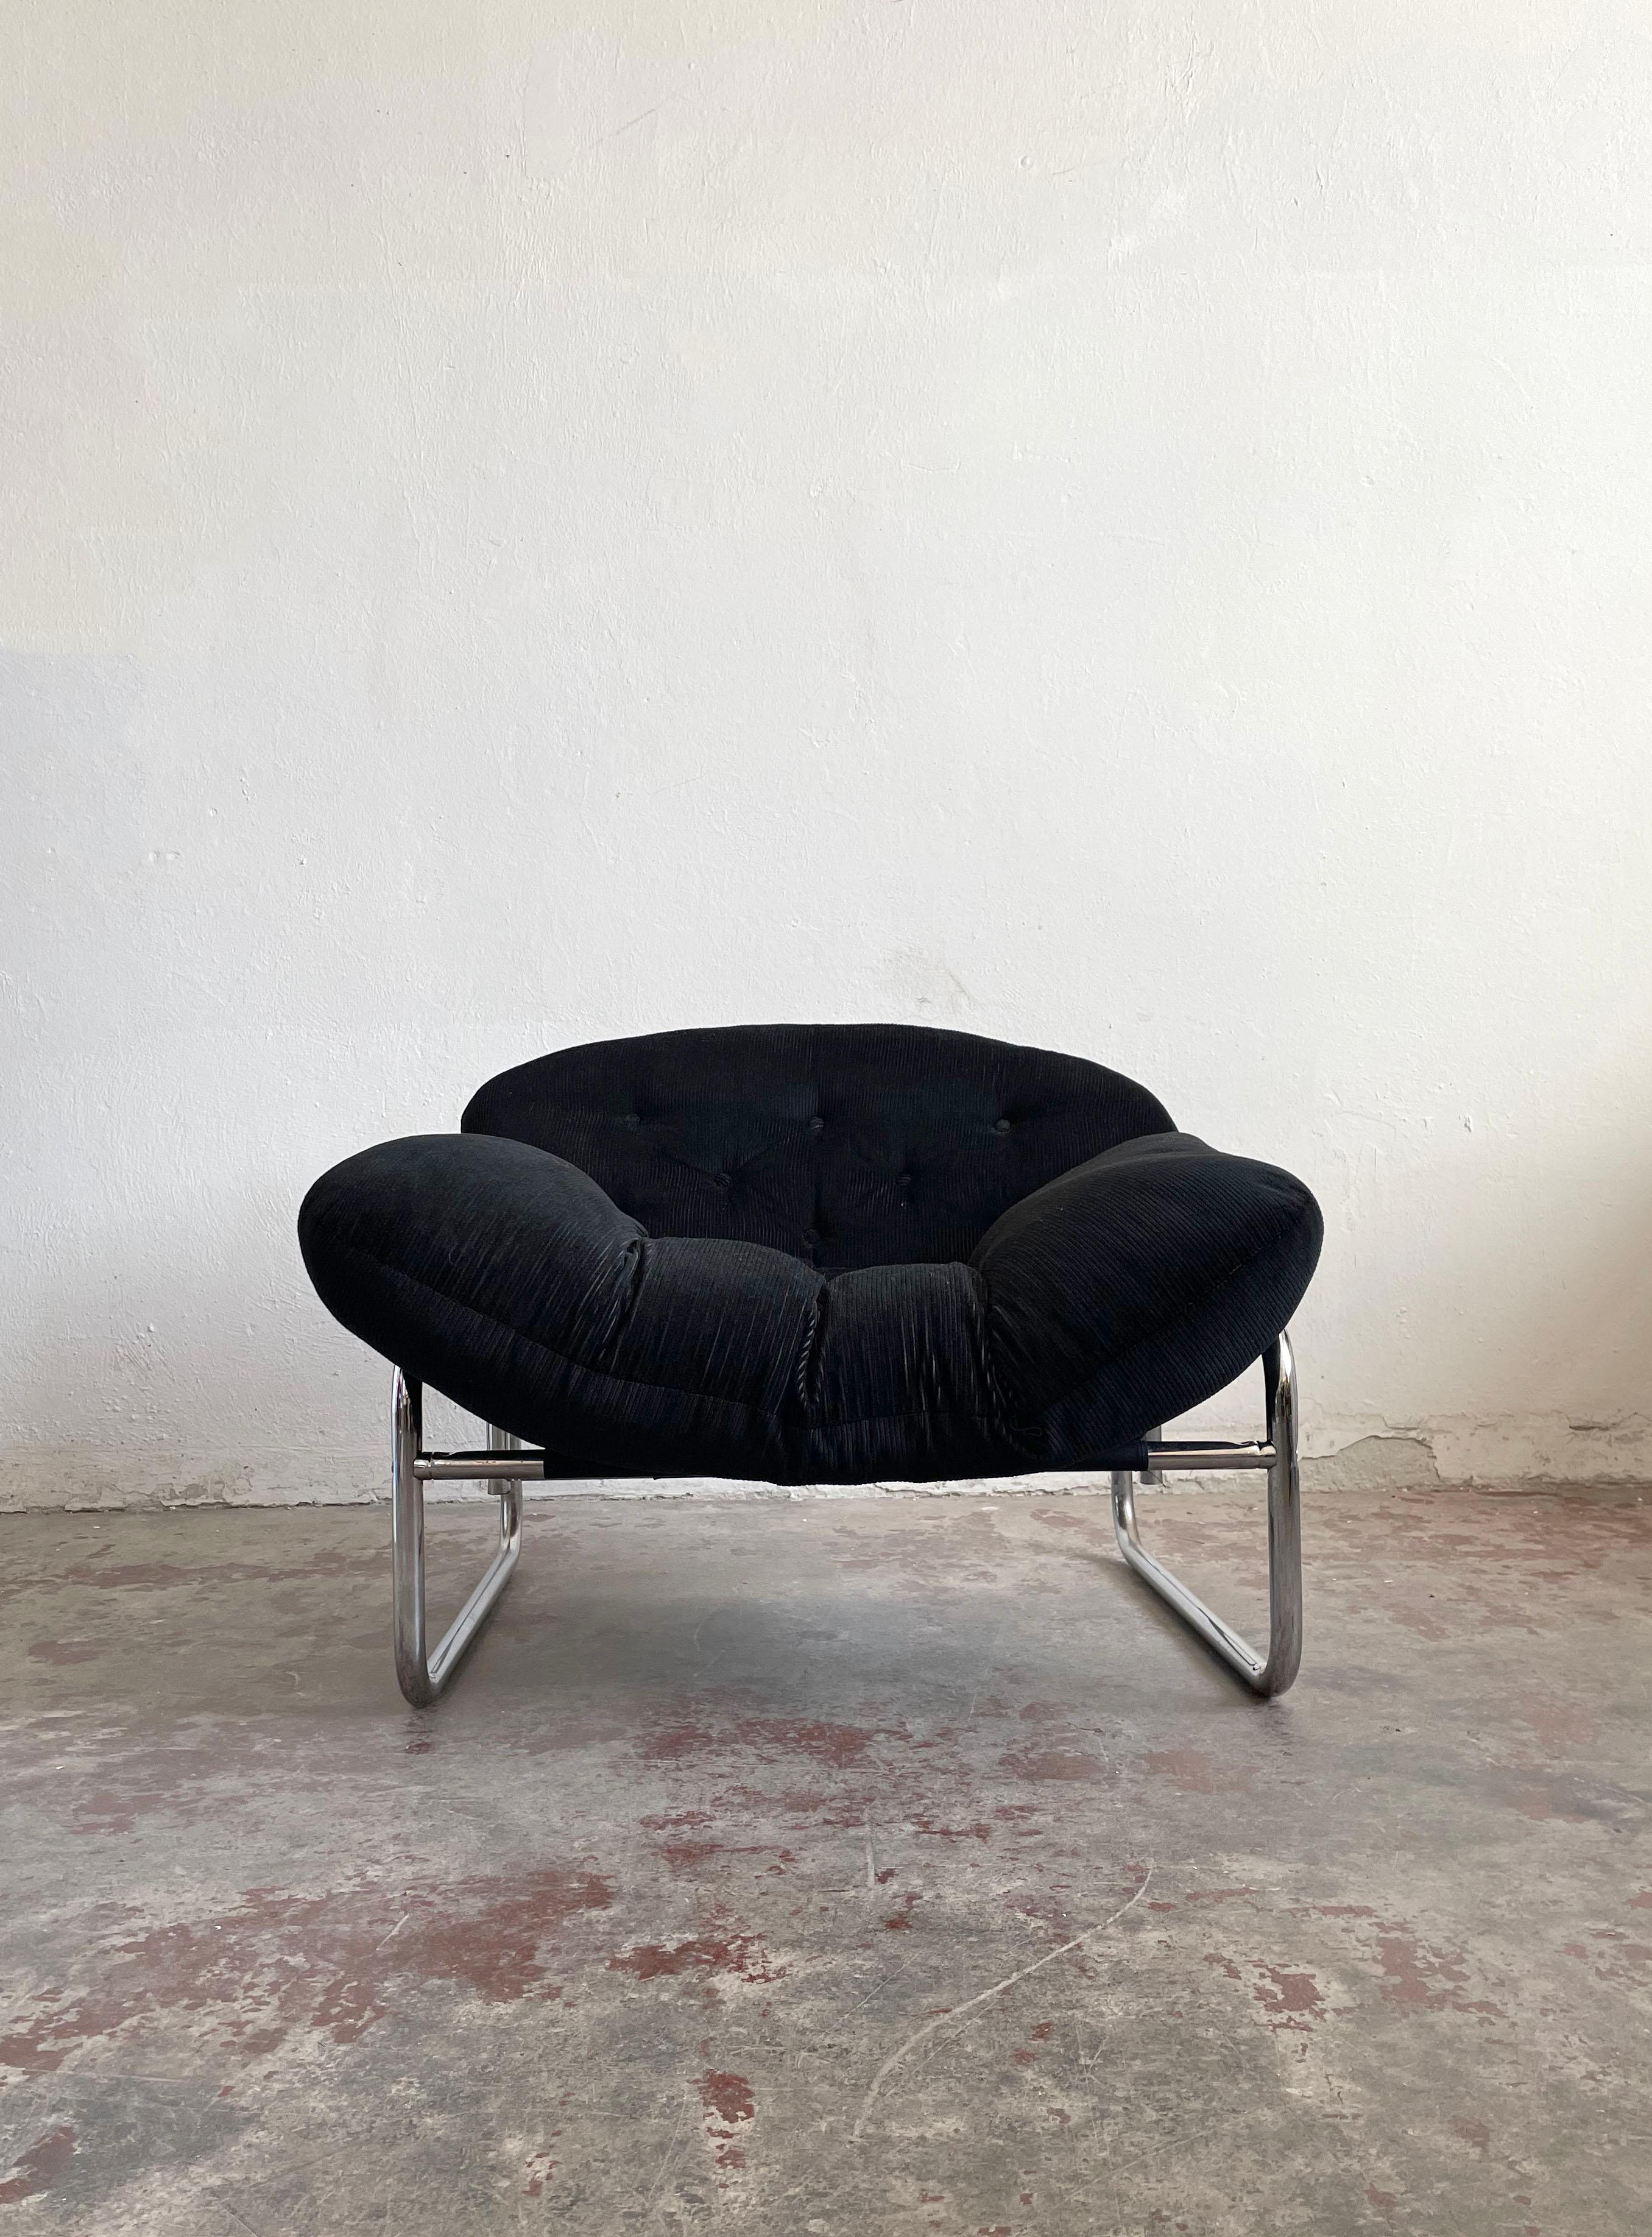 Exceptionally comfortable lounge chair manufactured in the 1970s by Swed Form

Design by Johan Bertil Häggström

The chair features a Bauhaus-style tubular chrome frame with a seat made of black canvas. The chair has an original loose cushion